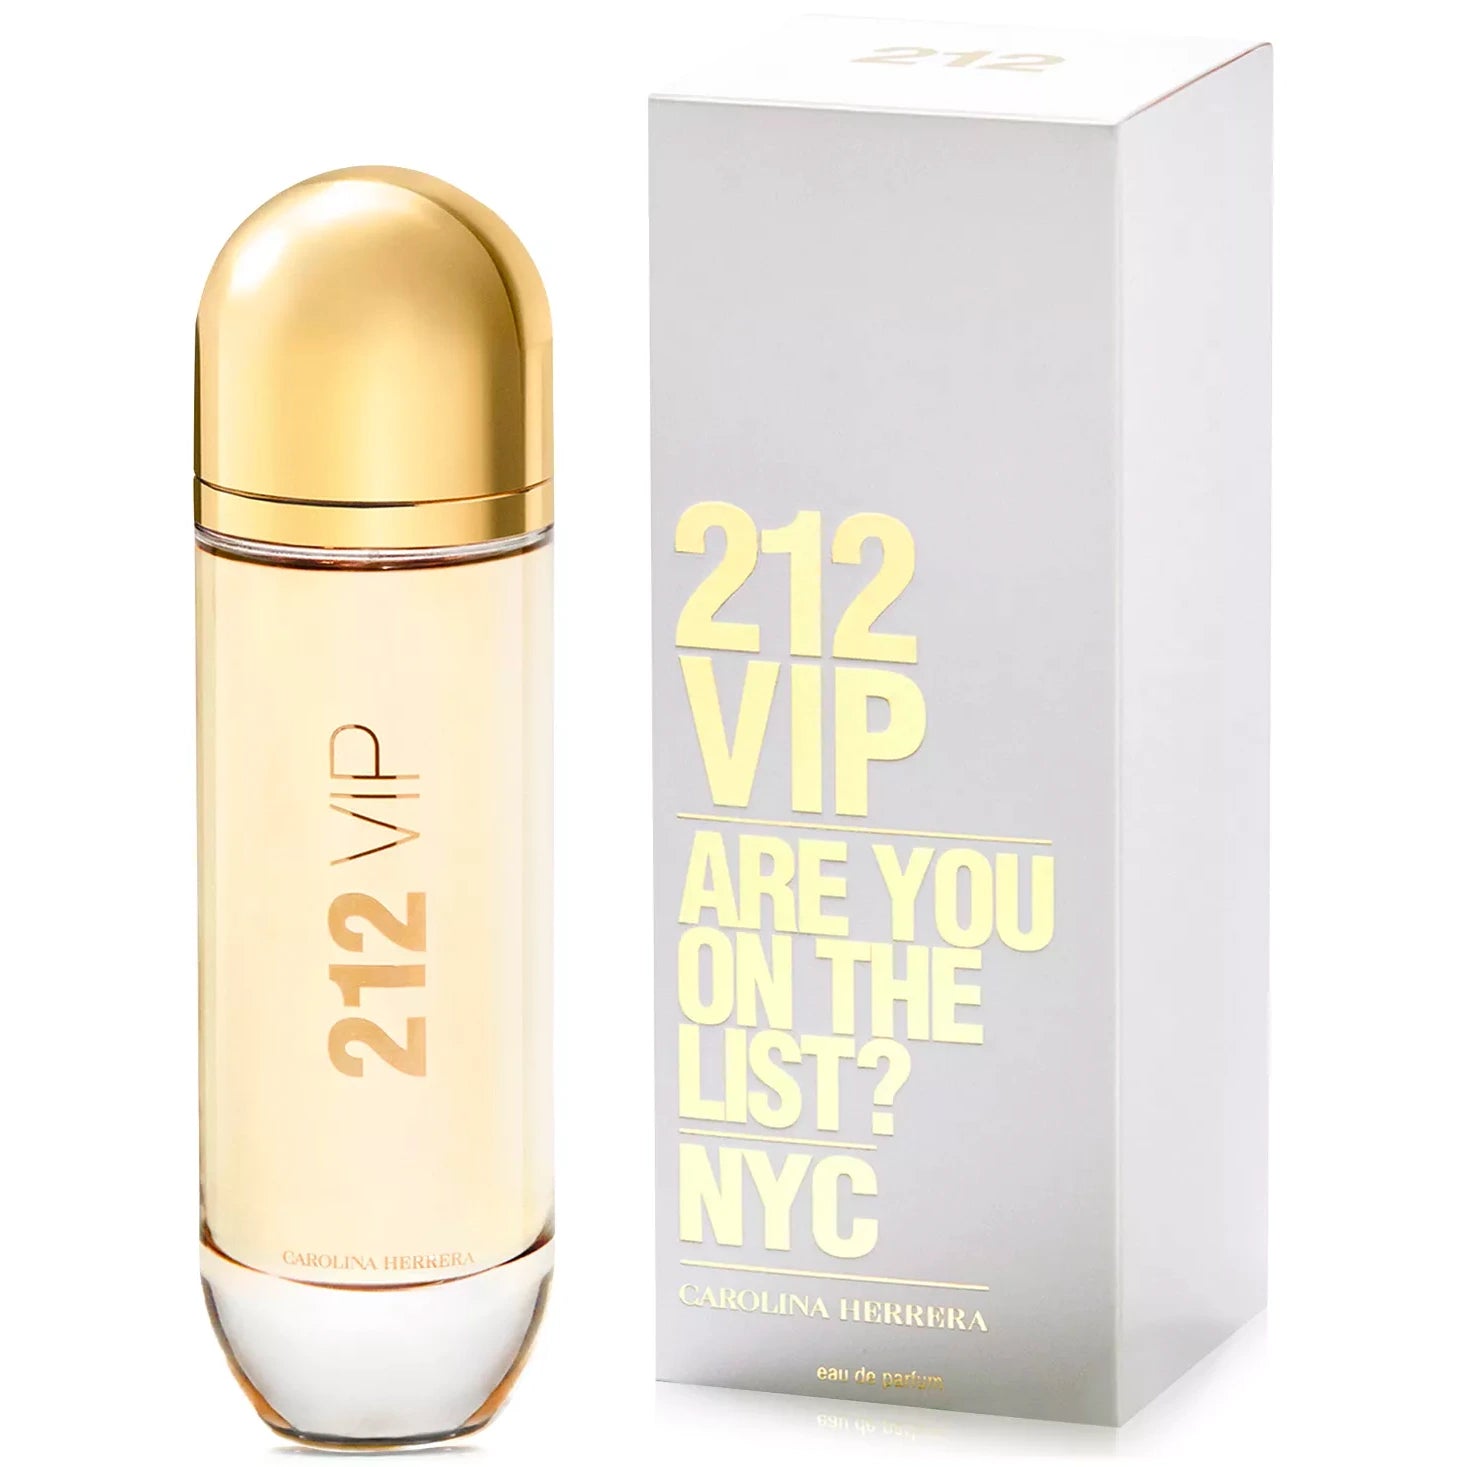 <p data-mce-fragment="1">Indulge in the sweet and exotic scent of 212 VIP EDP for women by Carolina Herrera. This luxurious fragrance combines a woody rum base with notes of passion fruit for a deliciously glamorous aroma. Housed in a gold bottle with a metallic design, it's a modern icon of youth and sophistication.</p>